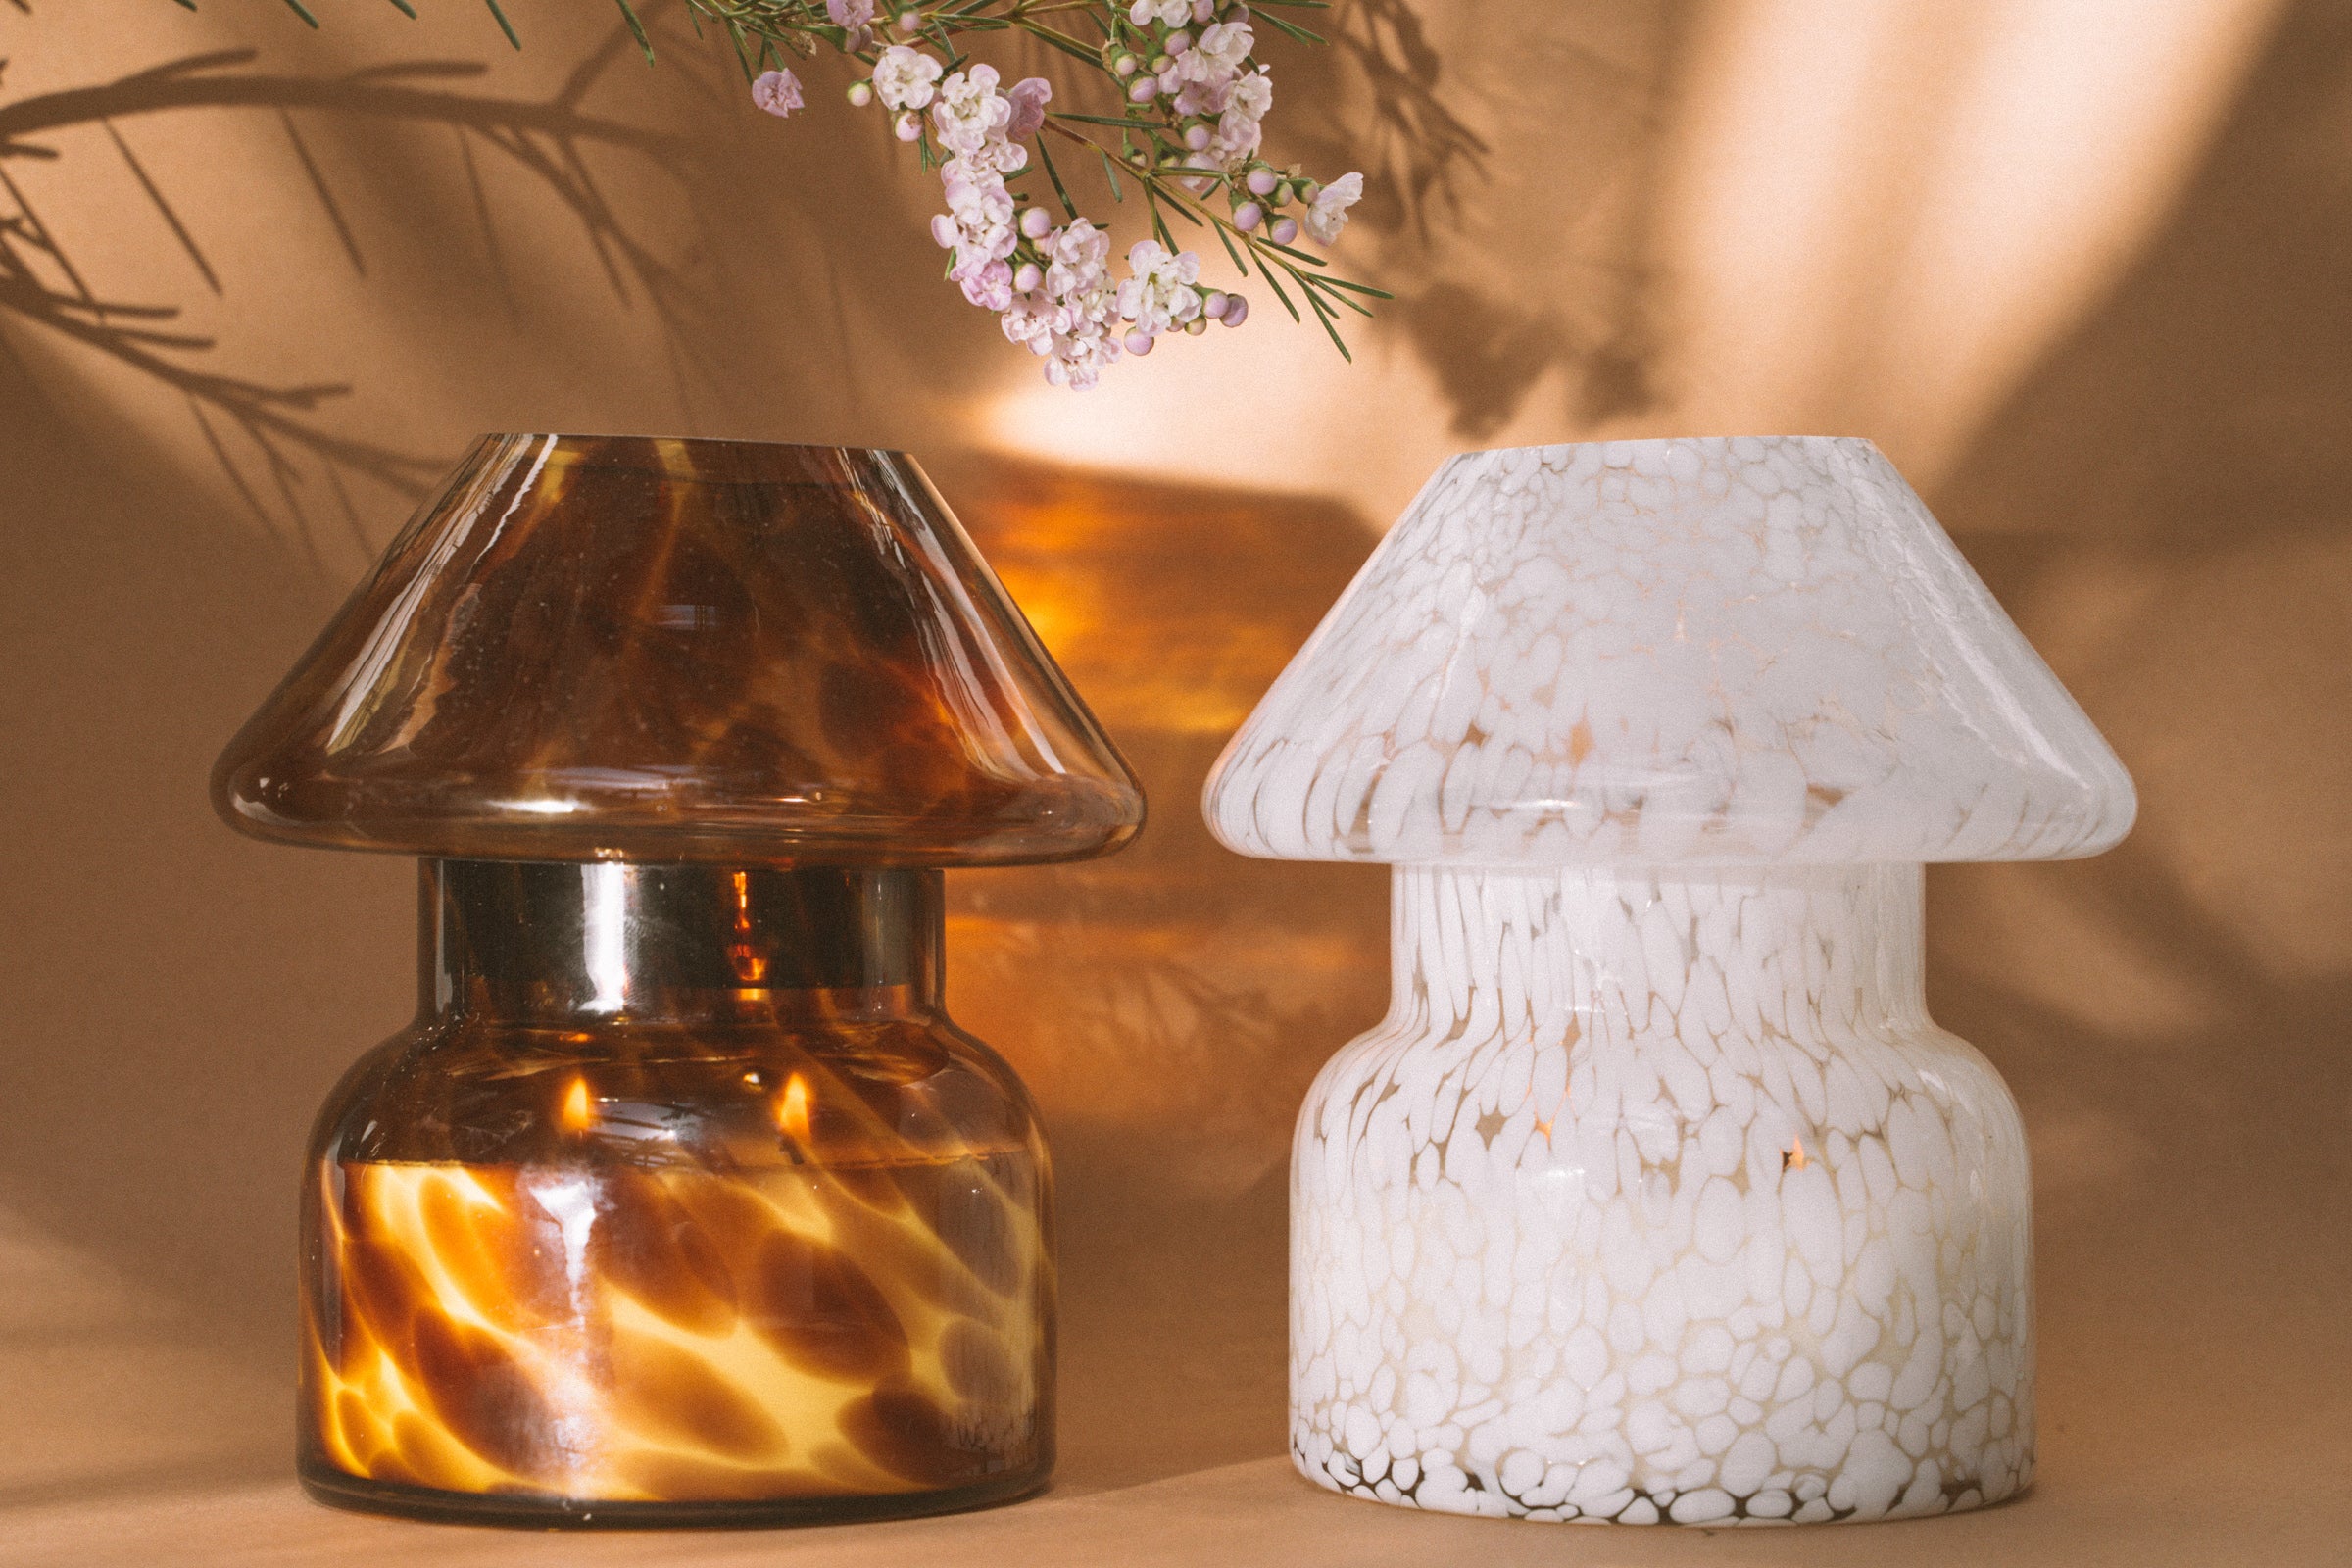 Mushroom candle lamp with light and dark brown spots on tan coloured glass. Leopard candle lamp is lit next to white candle lamp on tan background with dried flowers.